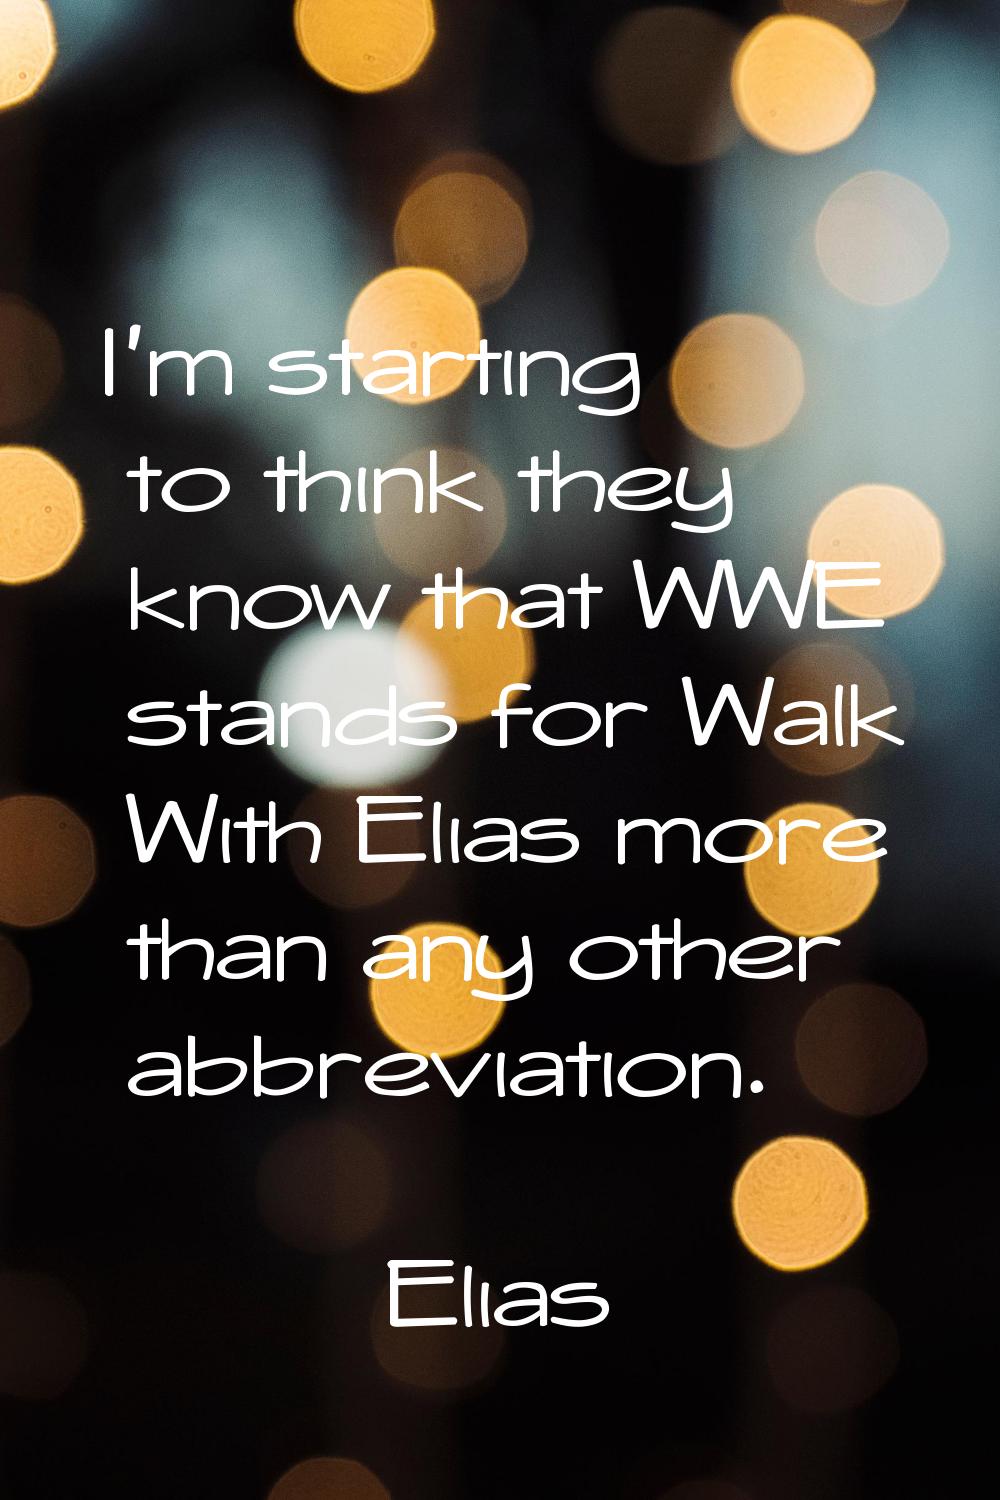 I'm starting to think they know that WWE stands for Walk With Elias more than any other abbreviatio